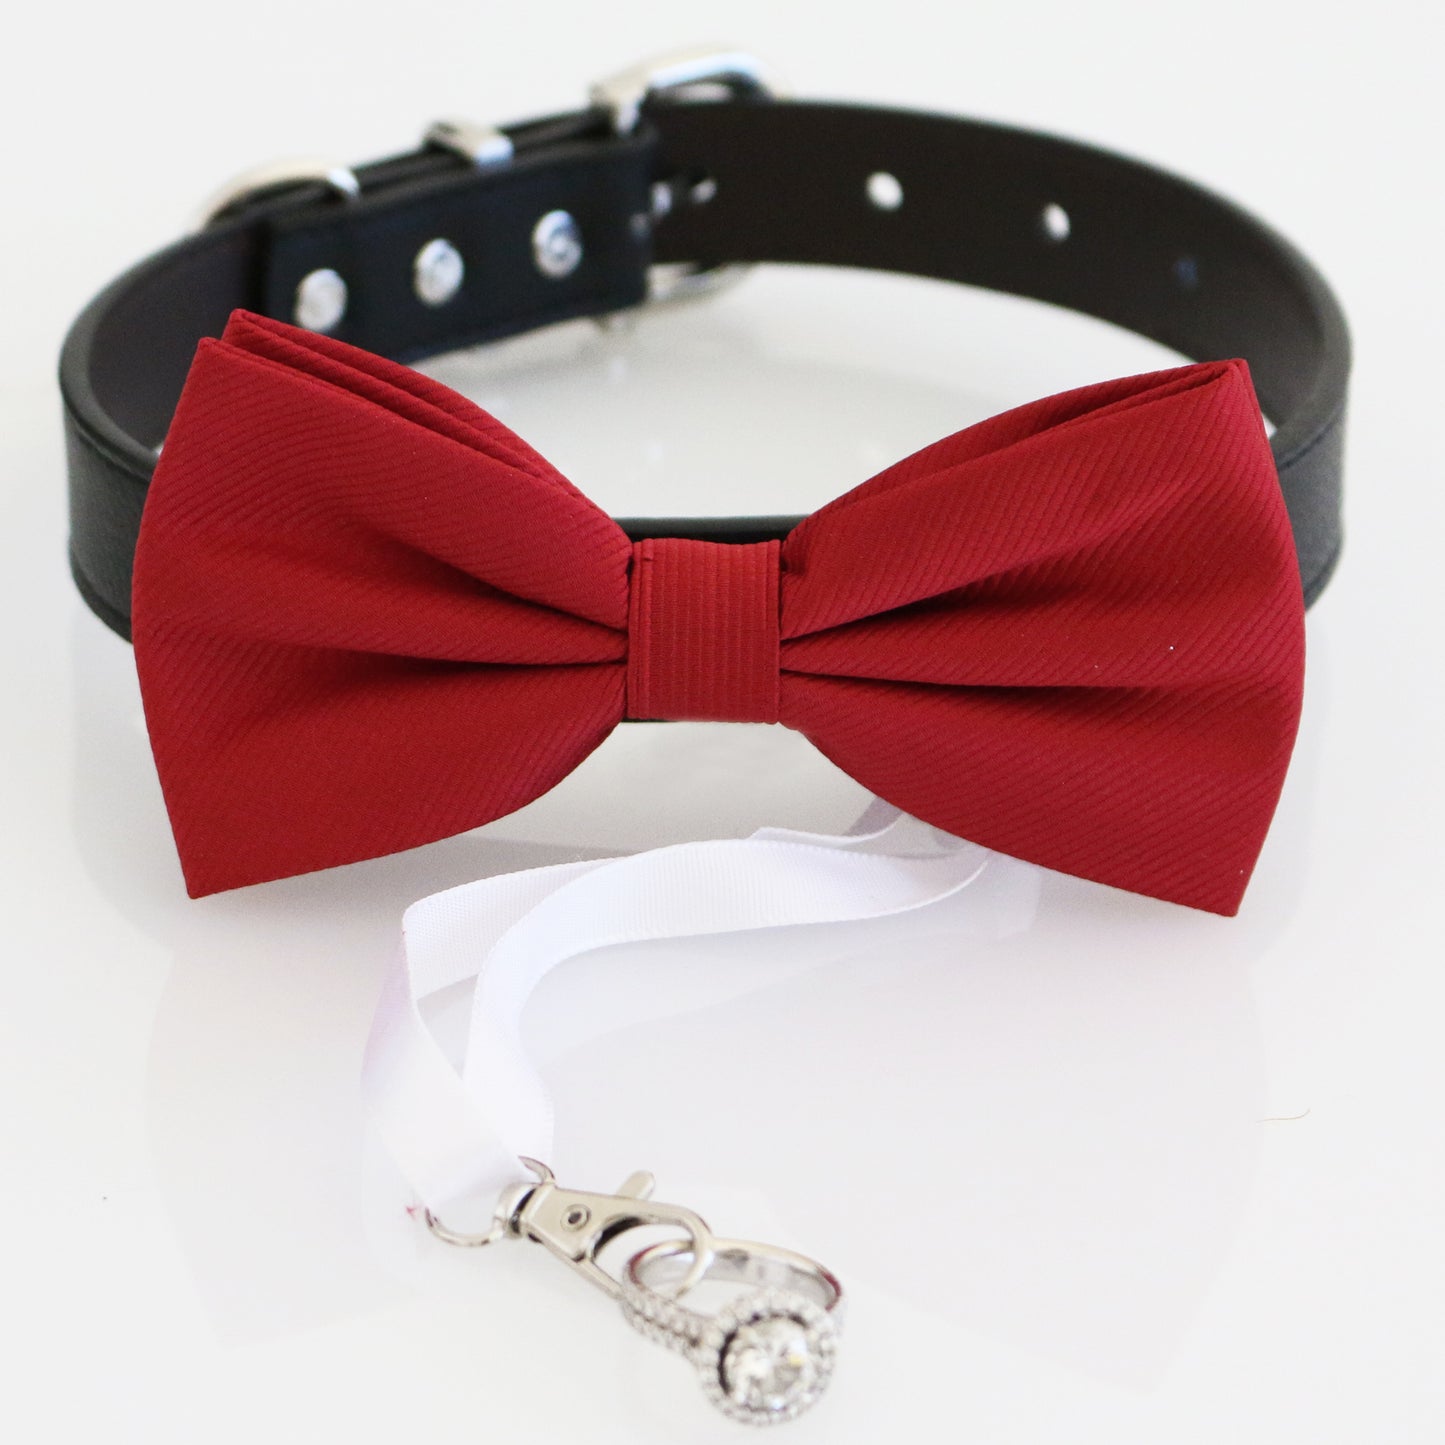 Dog Bow Tie ring bearer collar, Pet accessory, puppy lovers, Proposal, Red bow tie collar, Dog ring bearer , Wedding dog collar